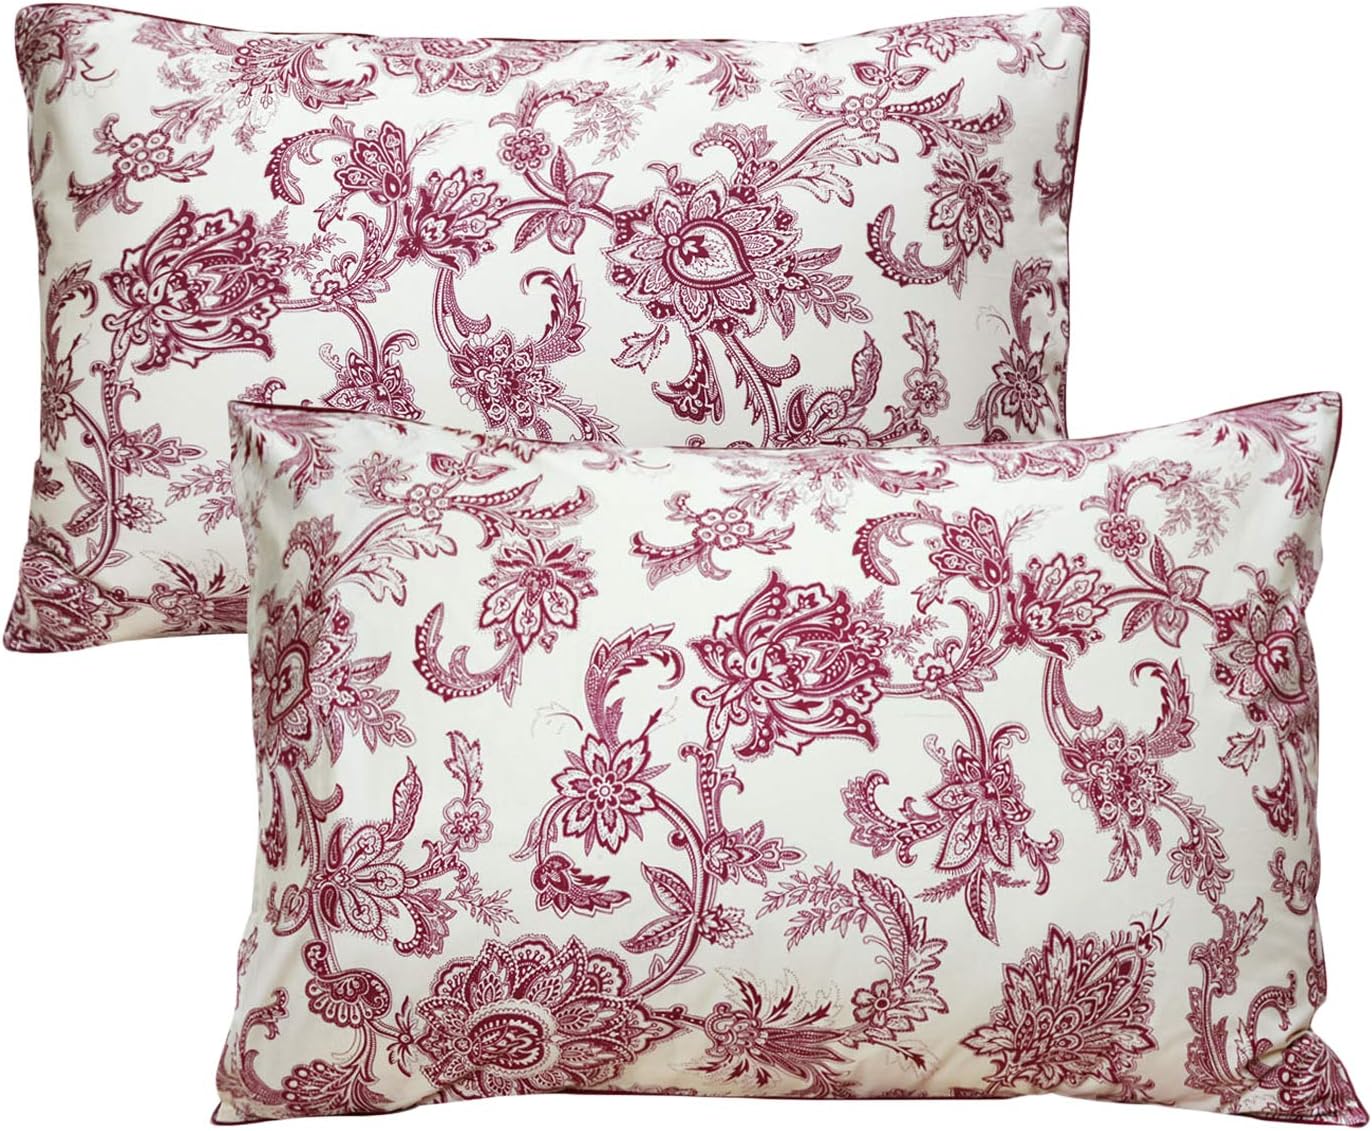 FADFAY 800 Thread Count 100% Egyptian Cotton Elegant Peony Print Pillowcases (Standard Size 19 29inch, Red)